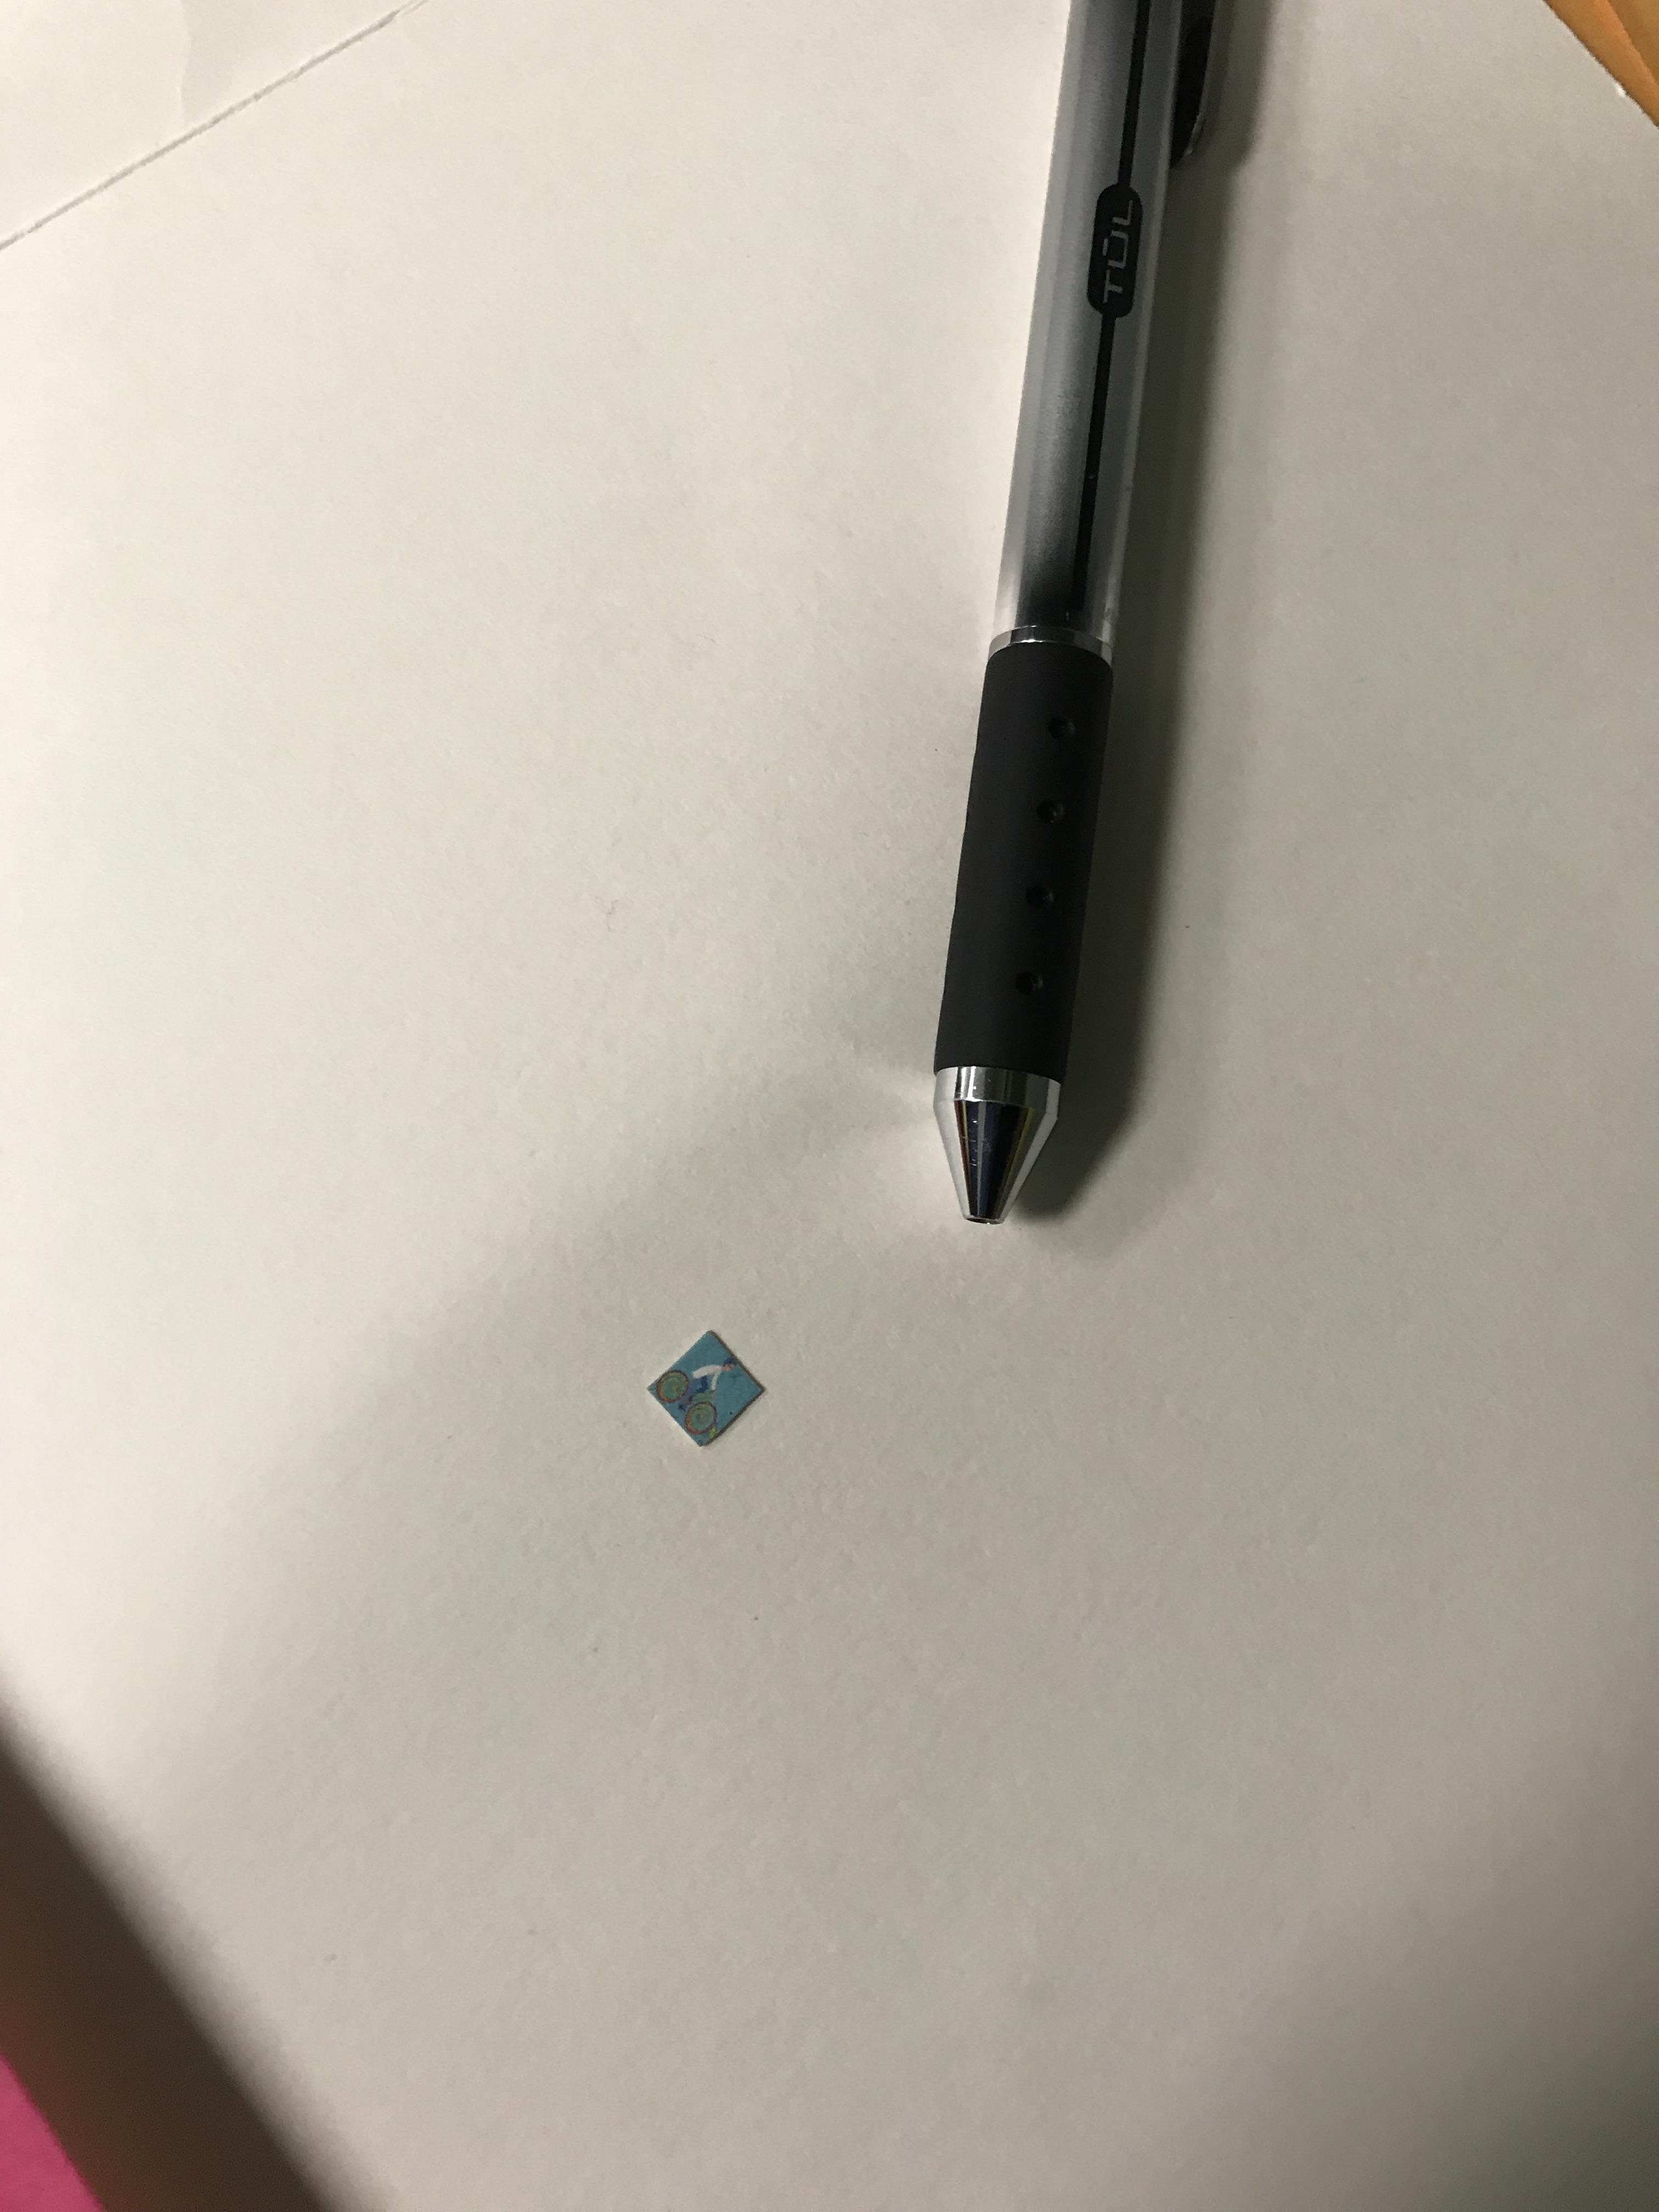 tab with pen next to it